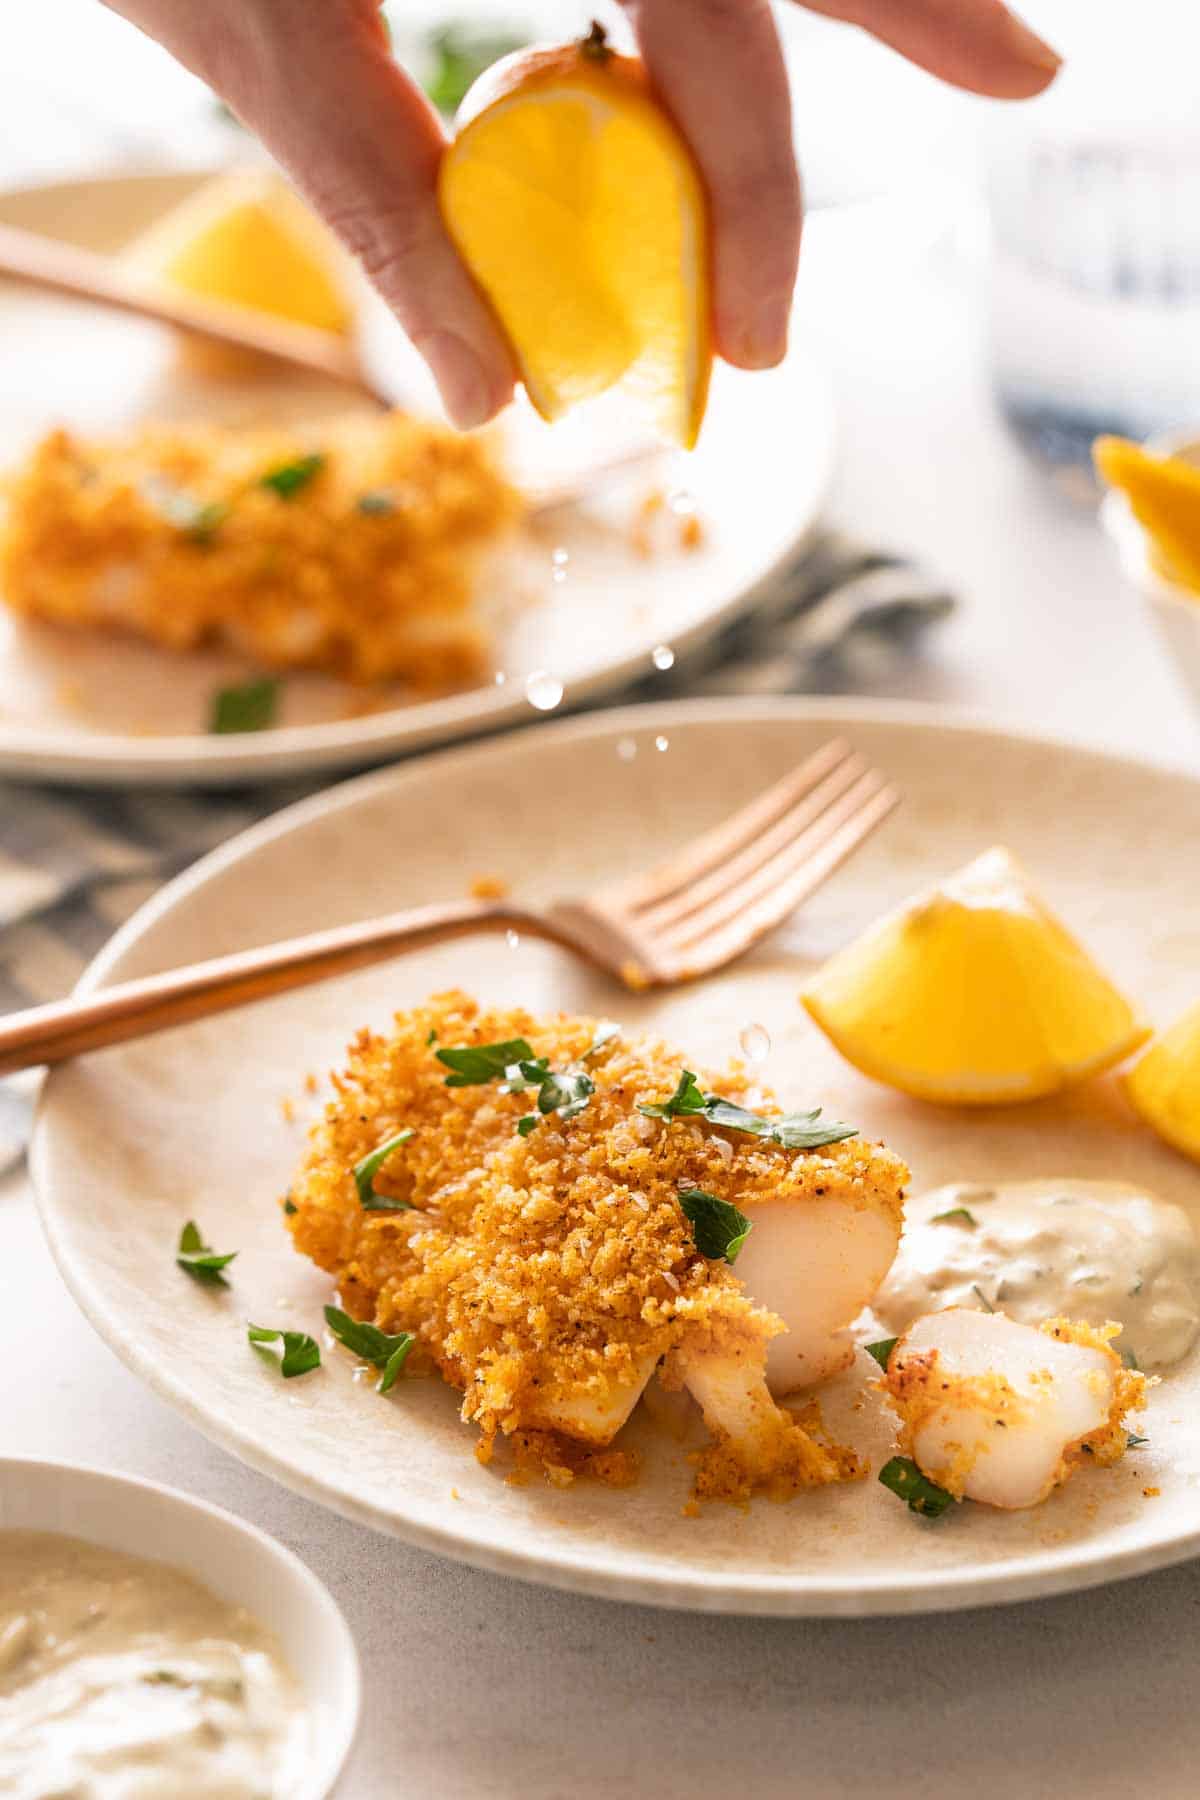 lemon being squeezed over panko crusted cod with tartar sauce and lemon on the side.